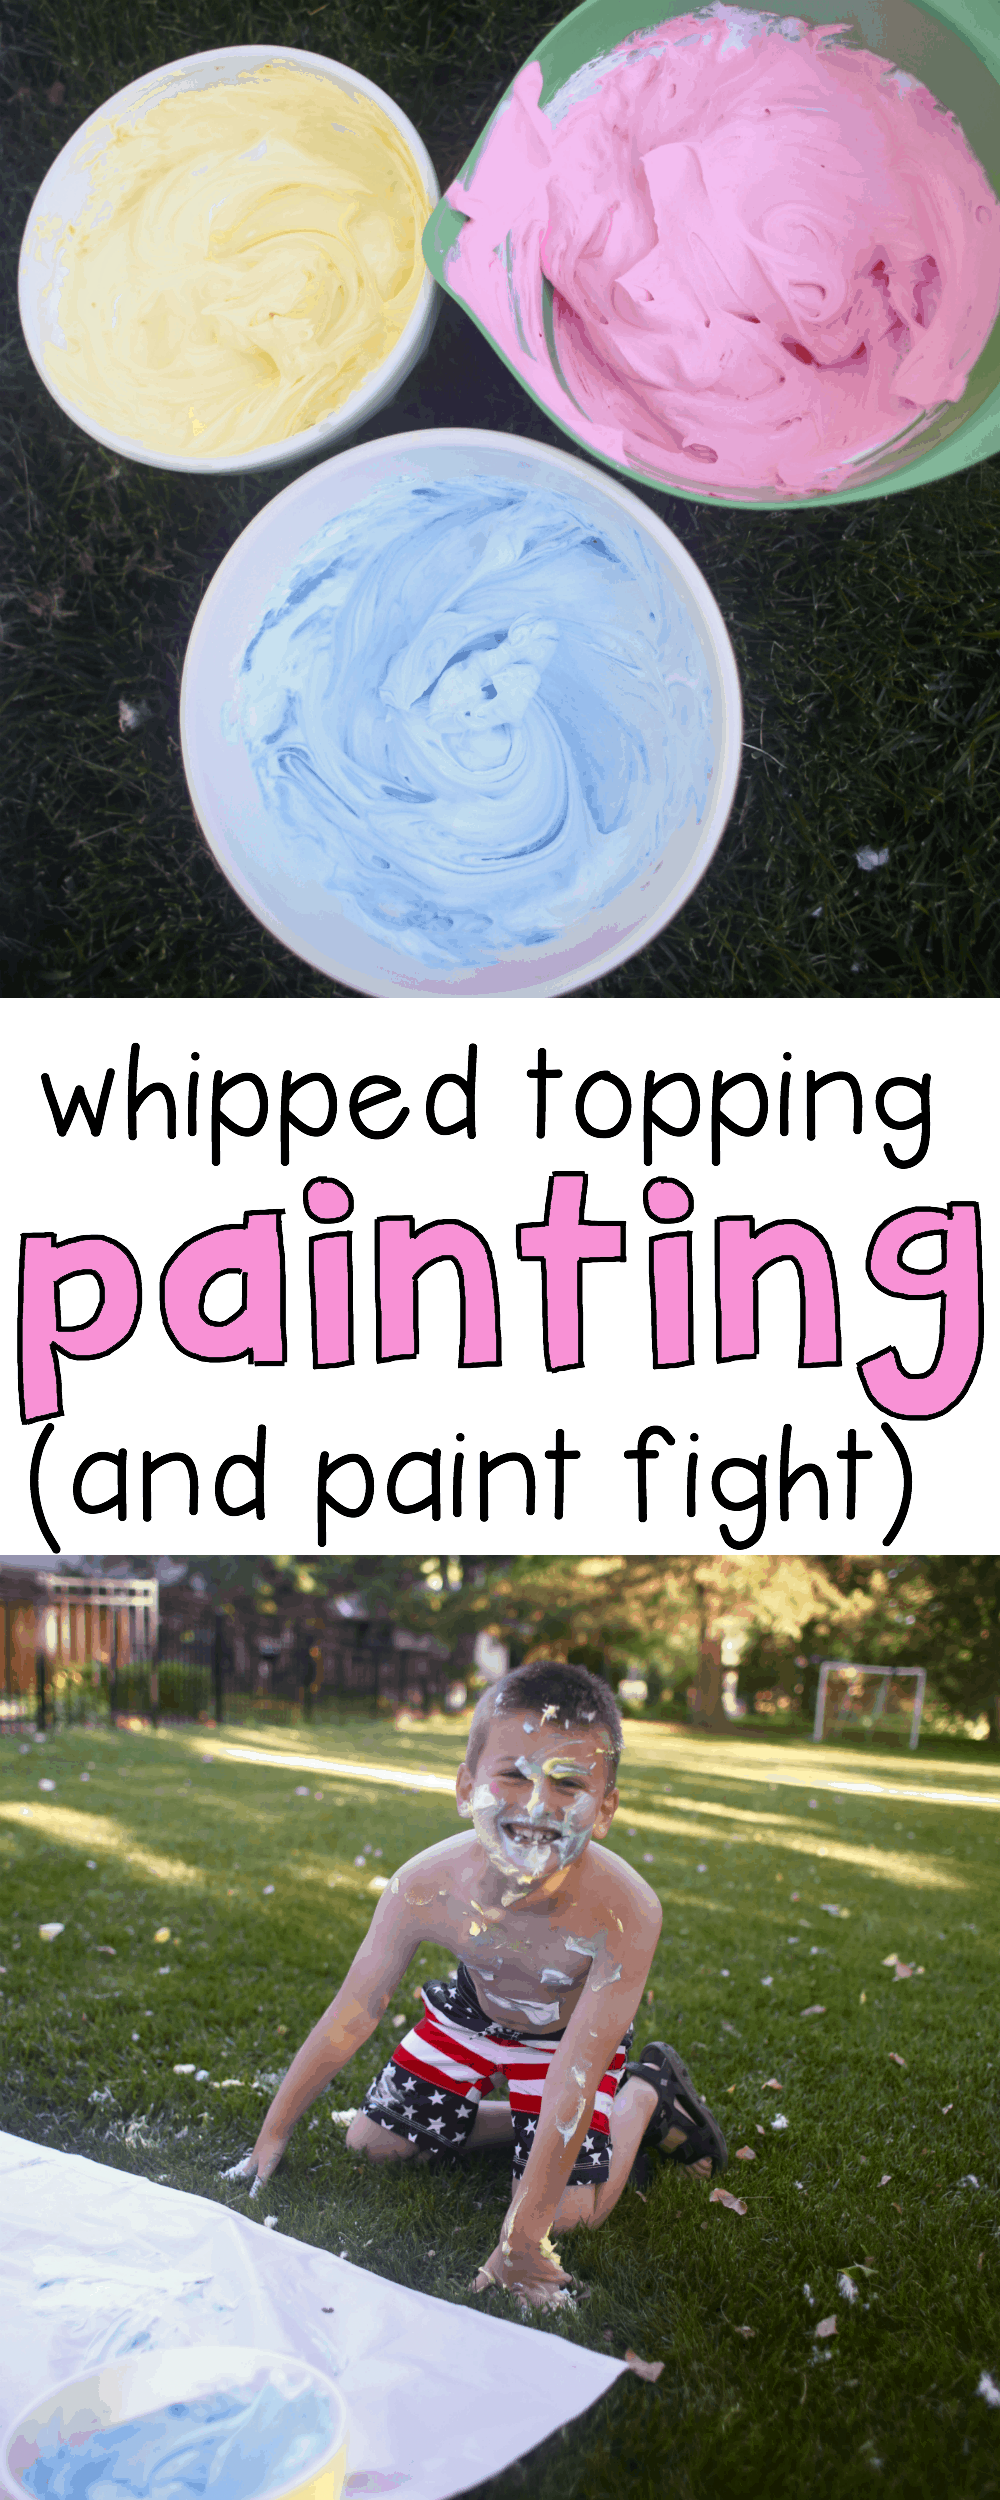 Whipped Topping Painting and Paint Fight